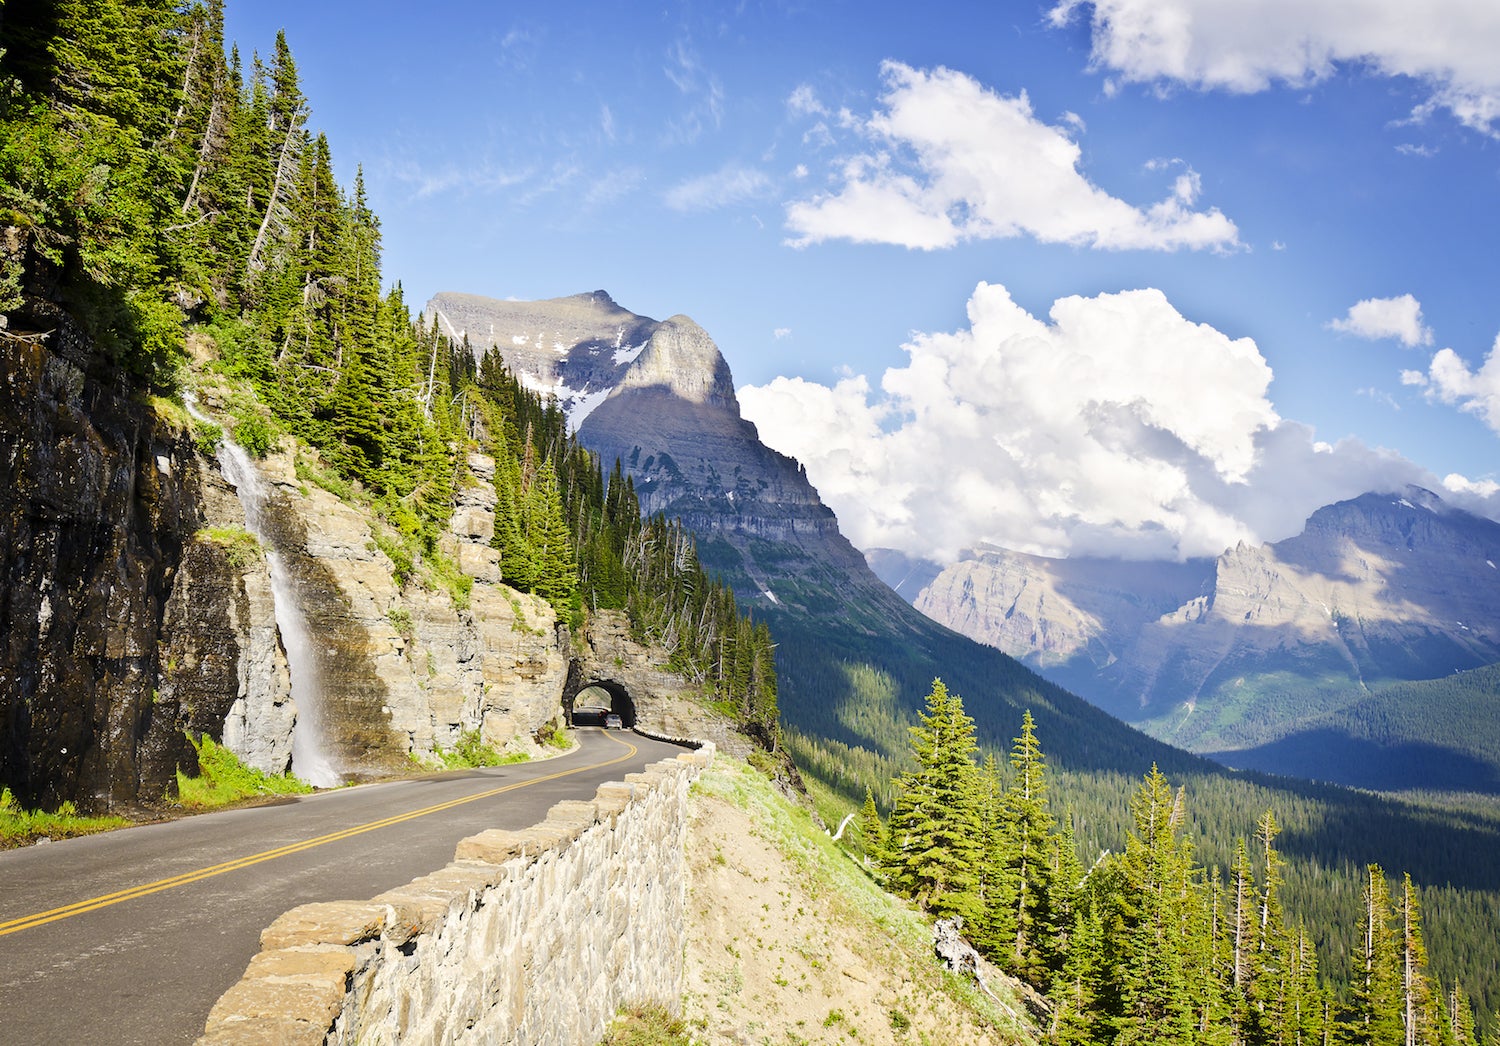 An adventure-of-a-lifetime drive from Yellowstone to Glacier